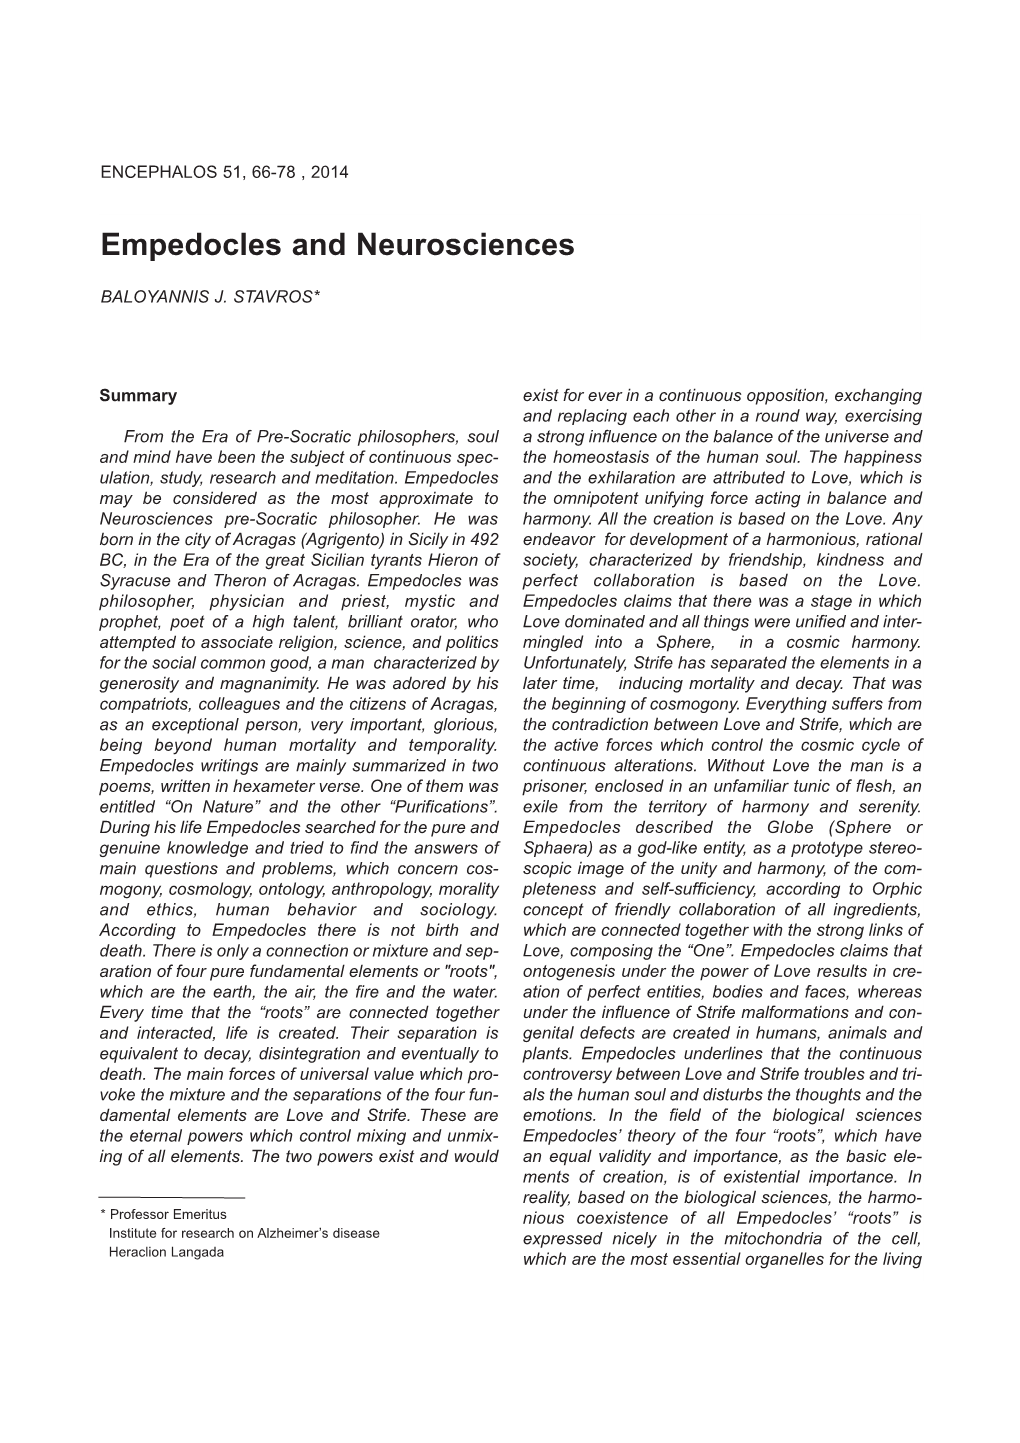 Empedocles and Neurosciences